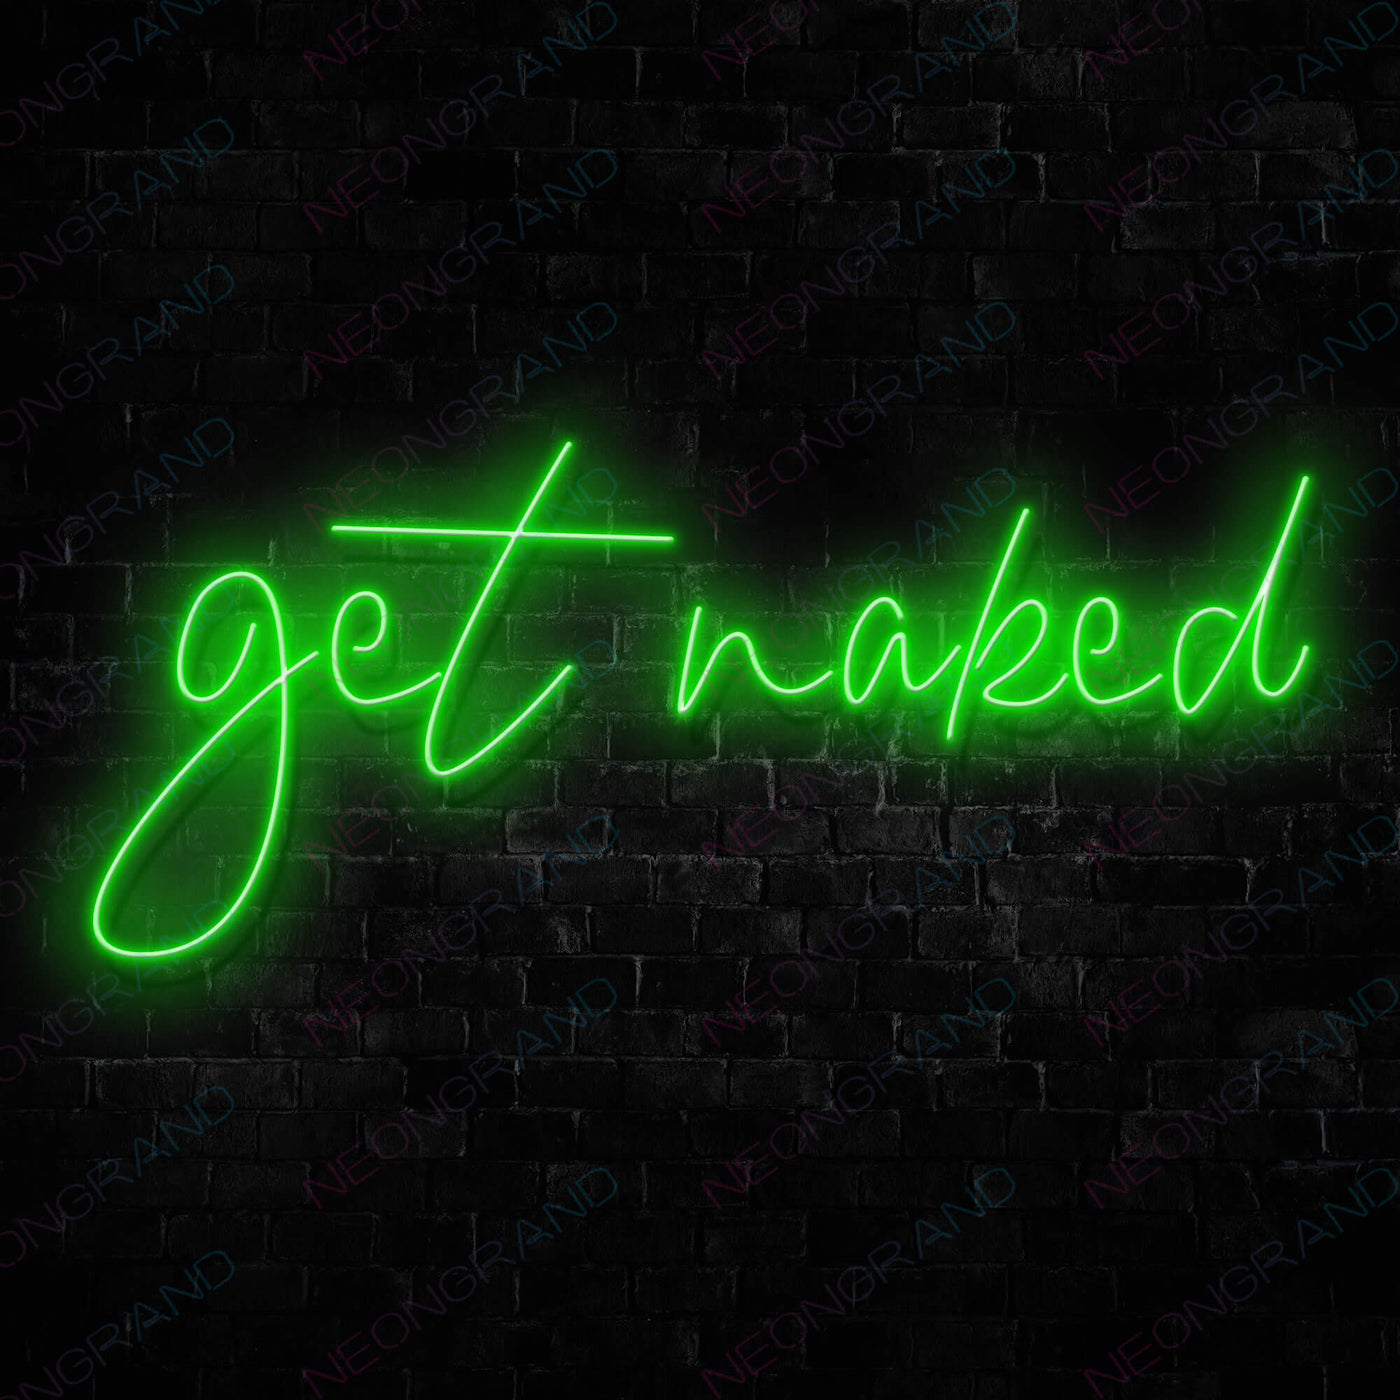 Get Naked Neon Sign green